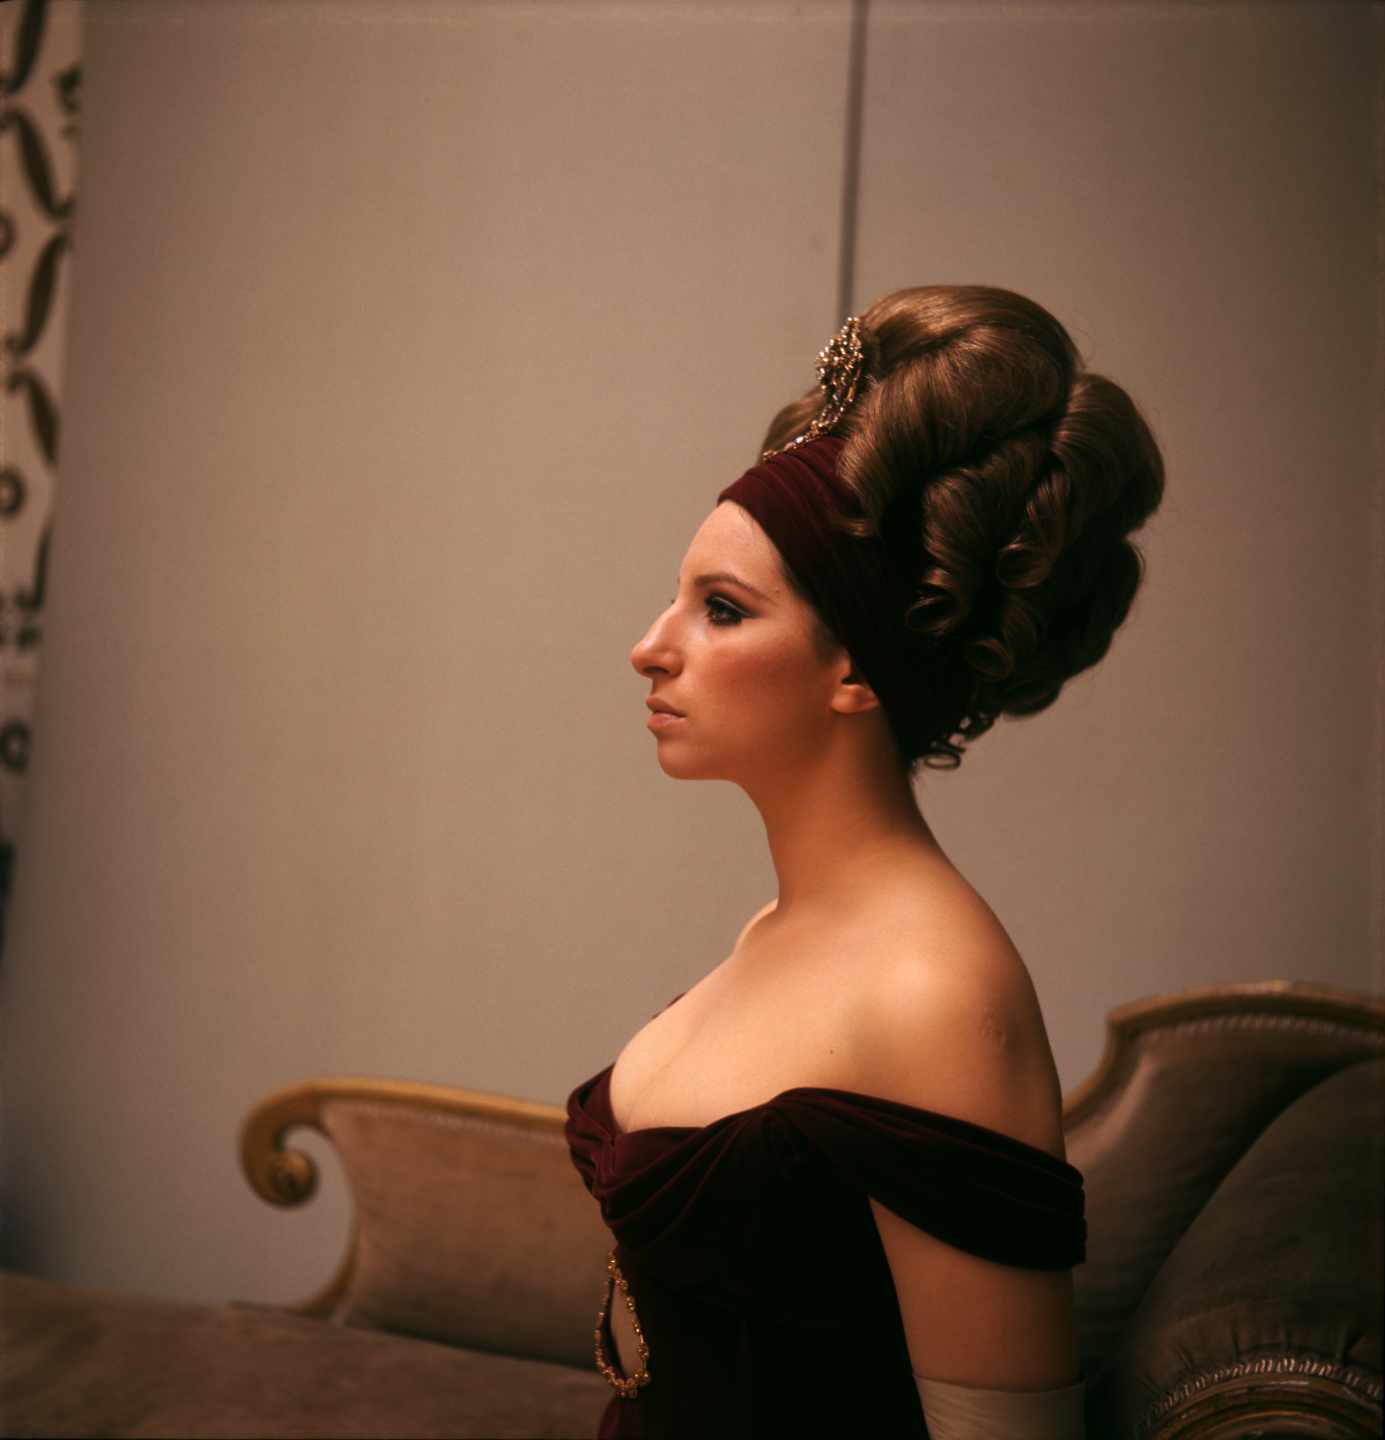 Barbra Streisand, 1969 © The Cecil Beaton Studio Archive at Sotheby’s